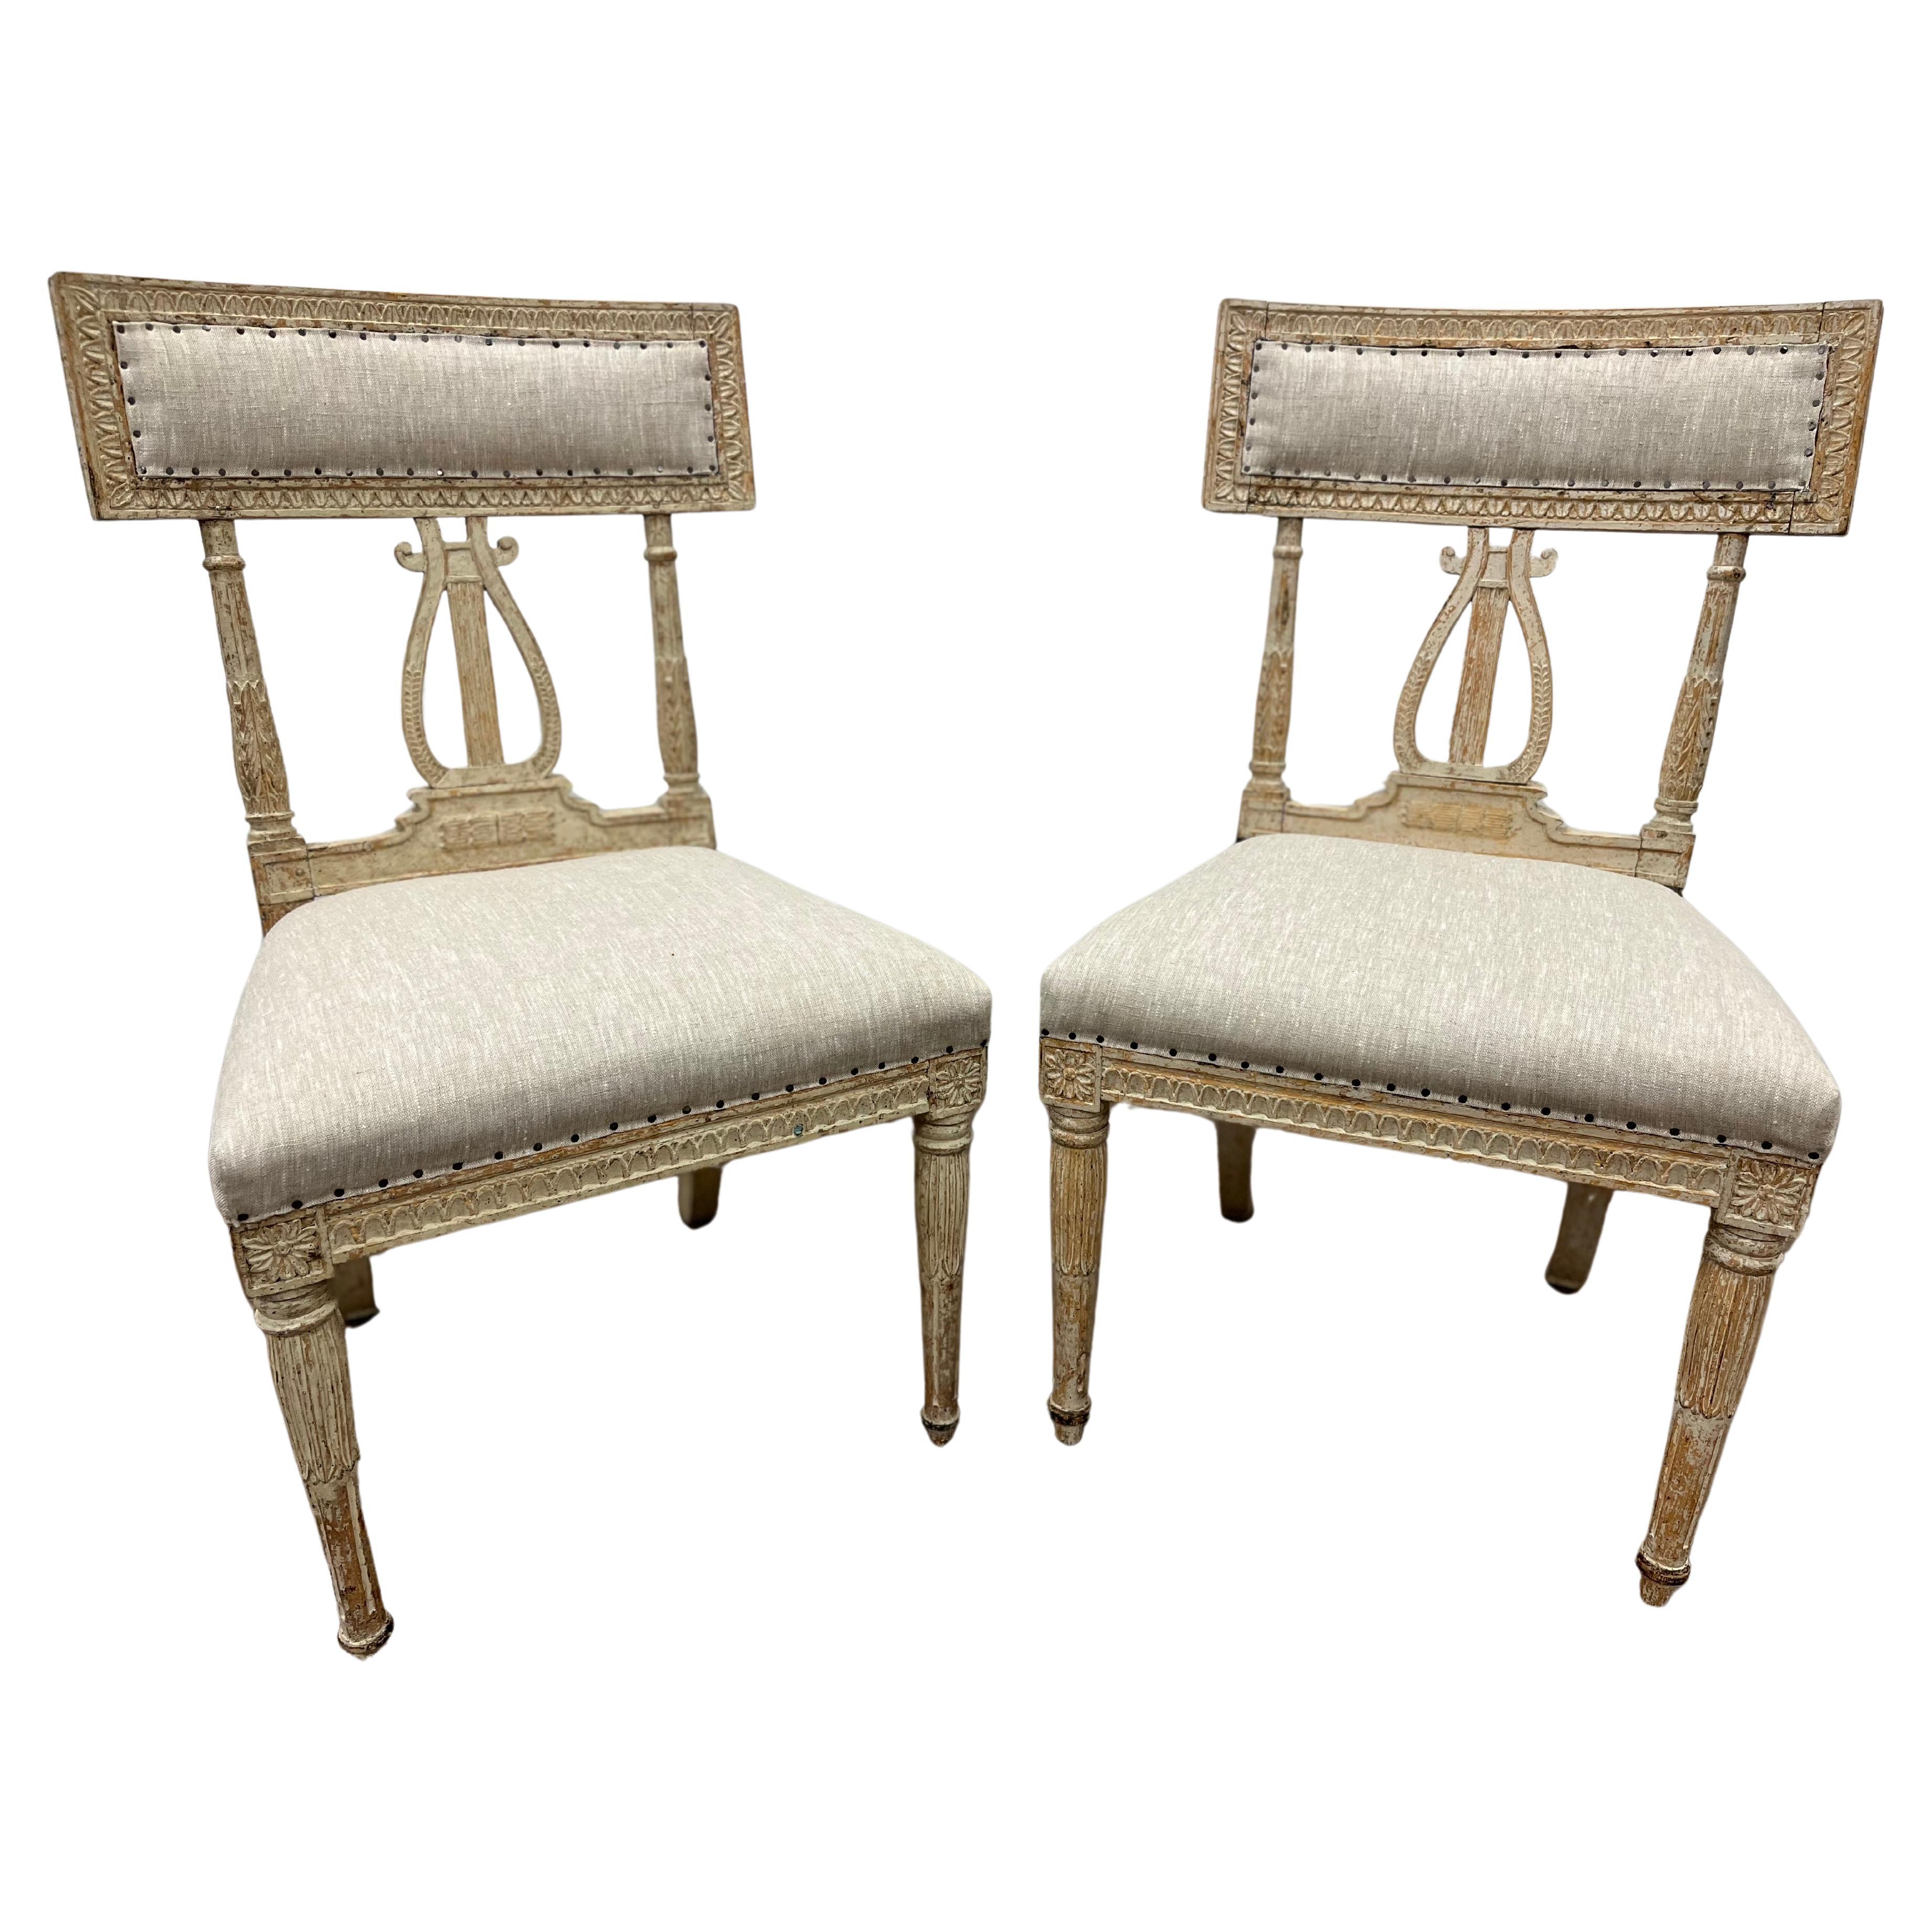 Pair of 18th Century Swedish Gustavian Lyre Chairs For Sale